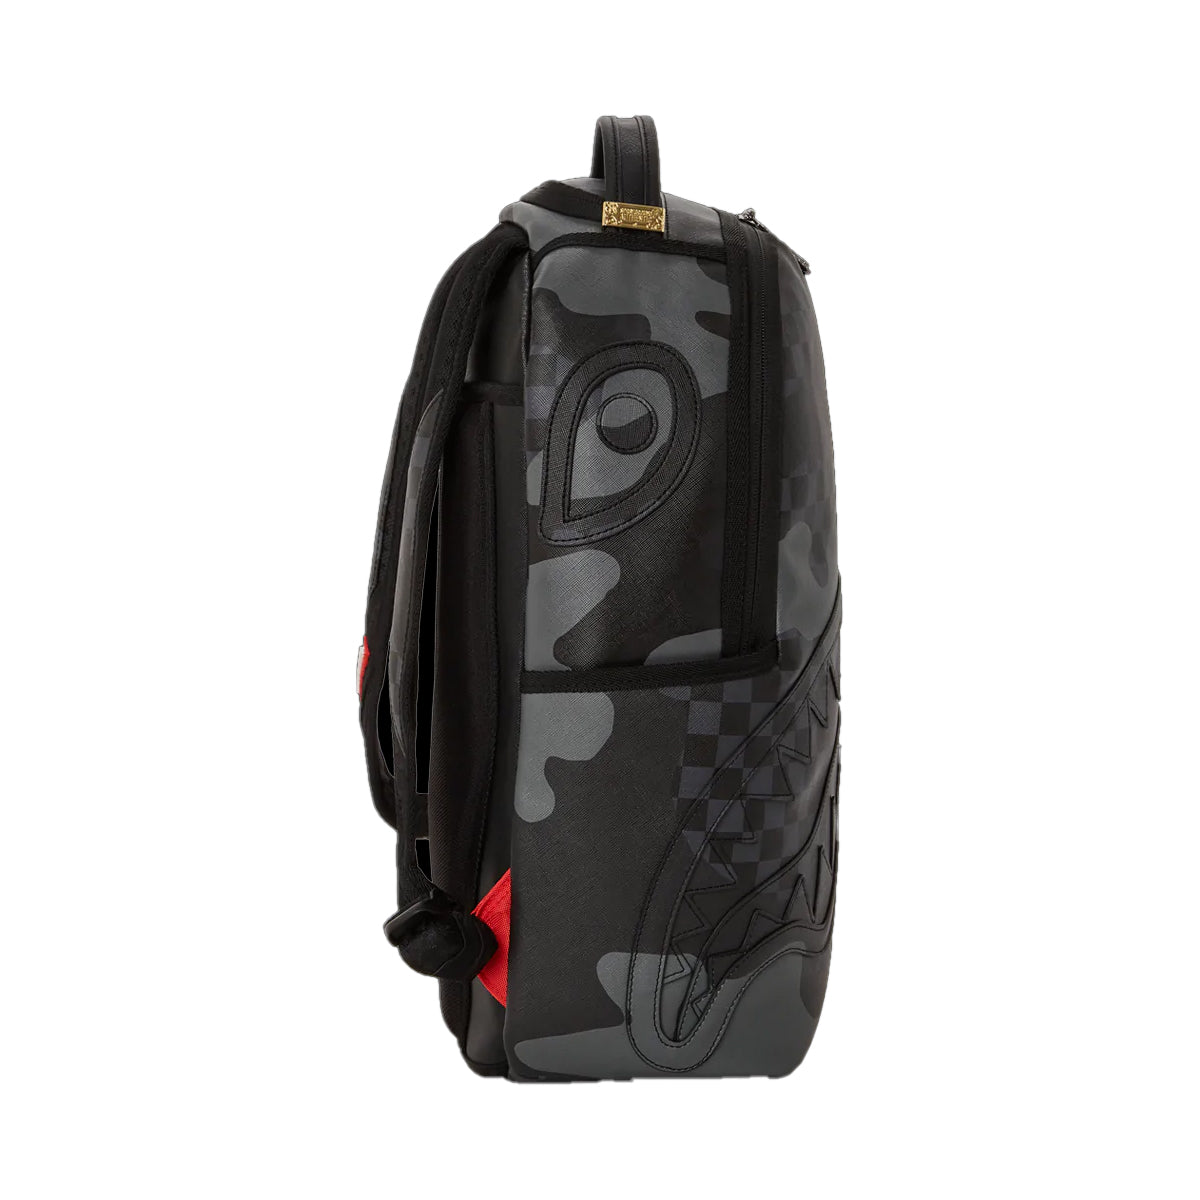 Backpacks Sprayground - 3 AM backpack in black and grey - 910B2922NSZ